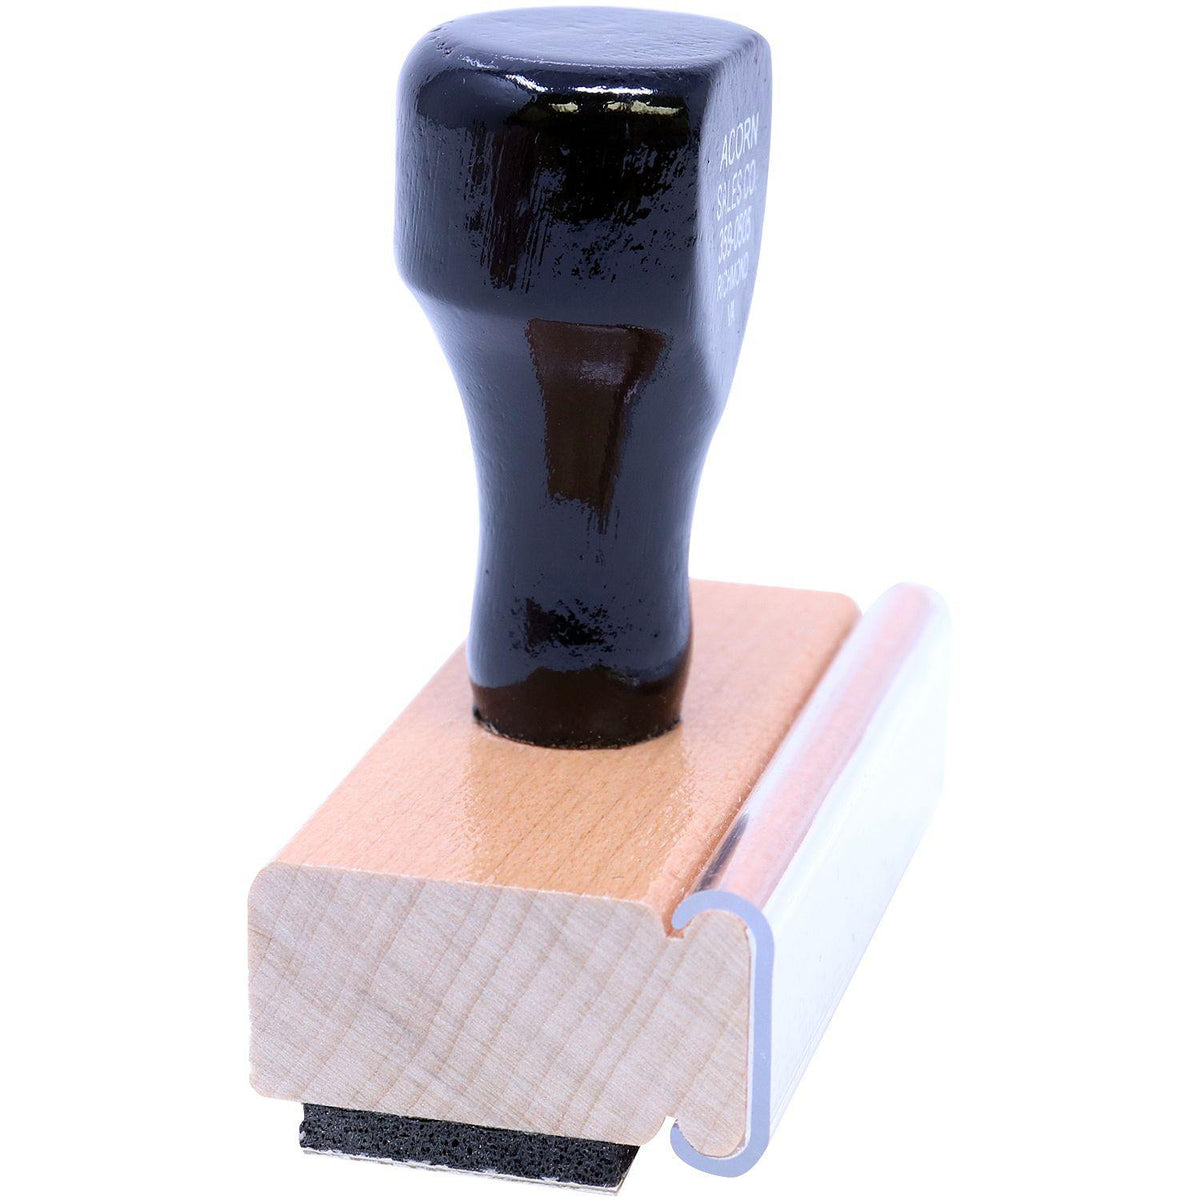 School Property Rubber Stamp - Engineer Seal Stamps - Brand_Acorn, Impression Size_Small, Stamp Type_Regular Stamp, Type of Use_Teacher